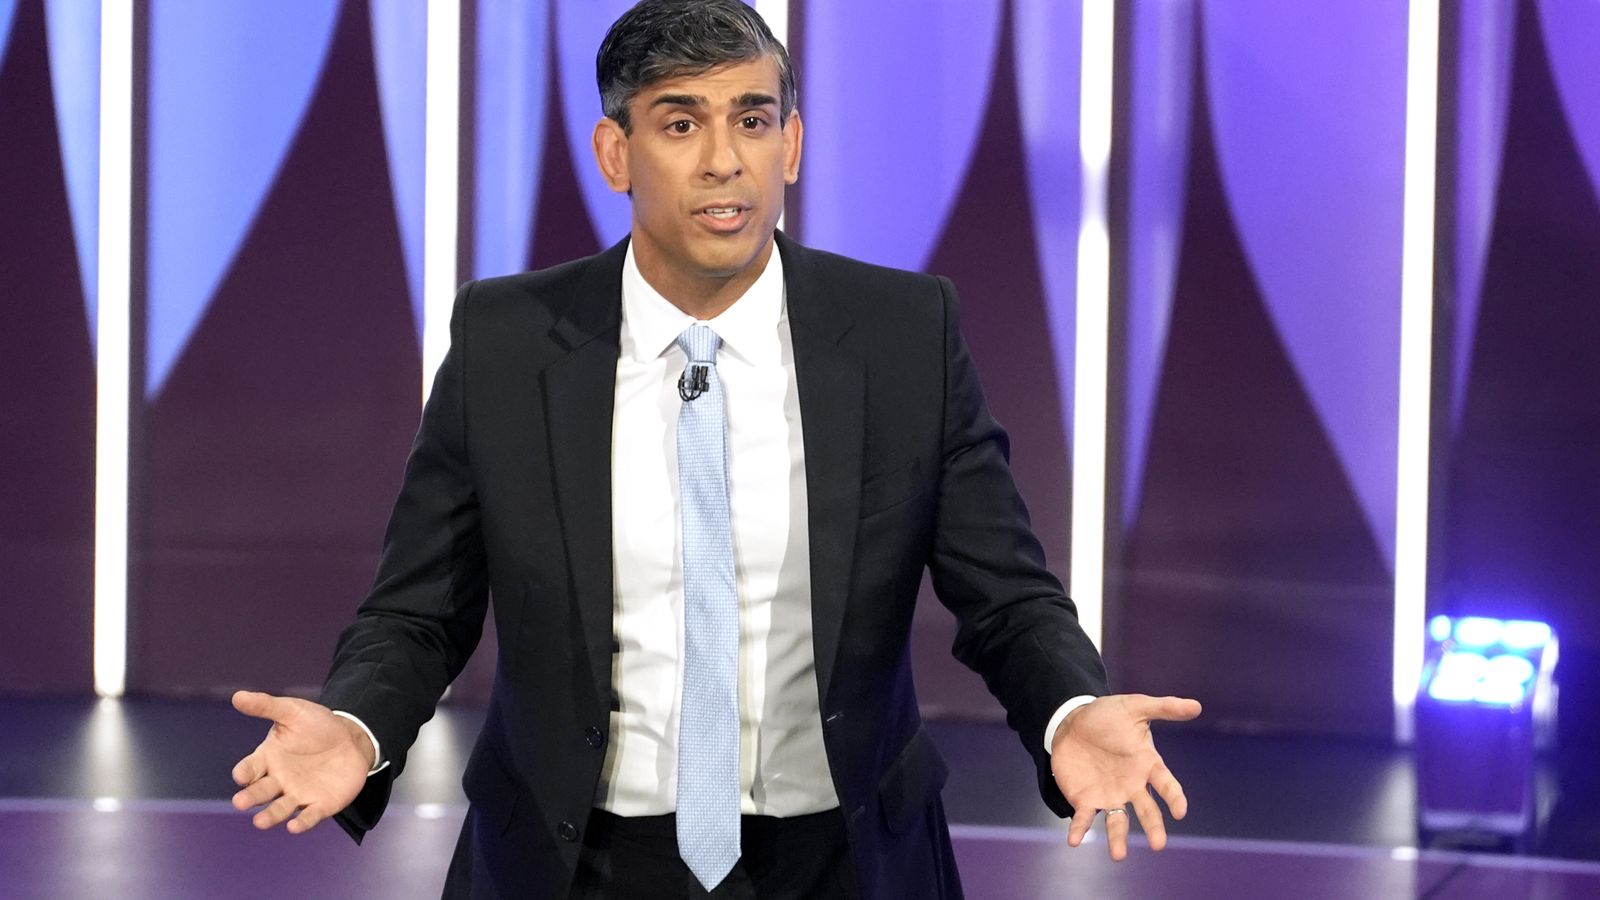 Rishi Sunak 'incredibly angry' over 'really serious' election date betting allegations